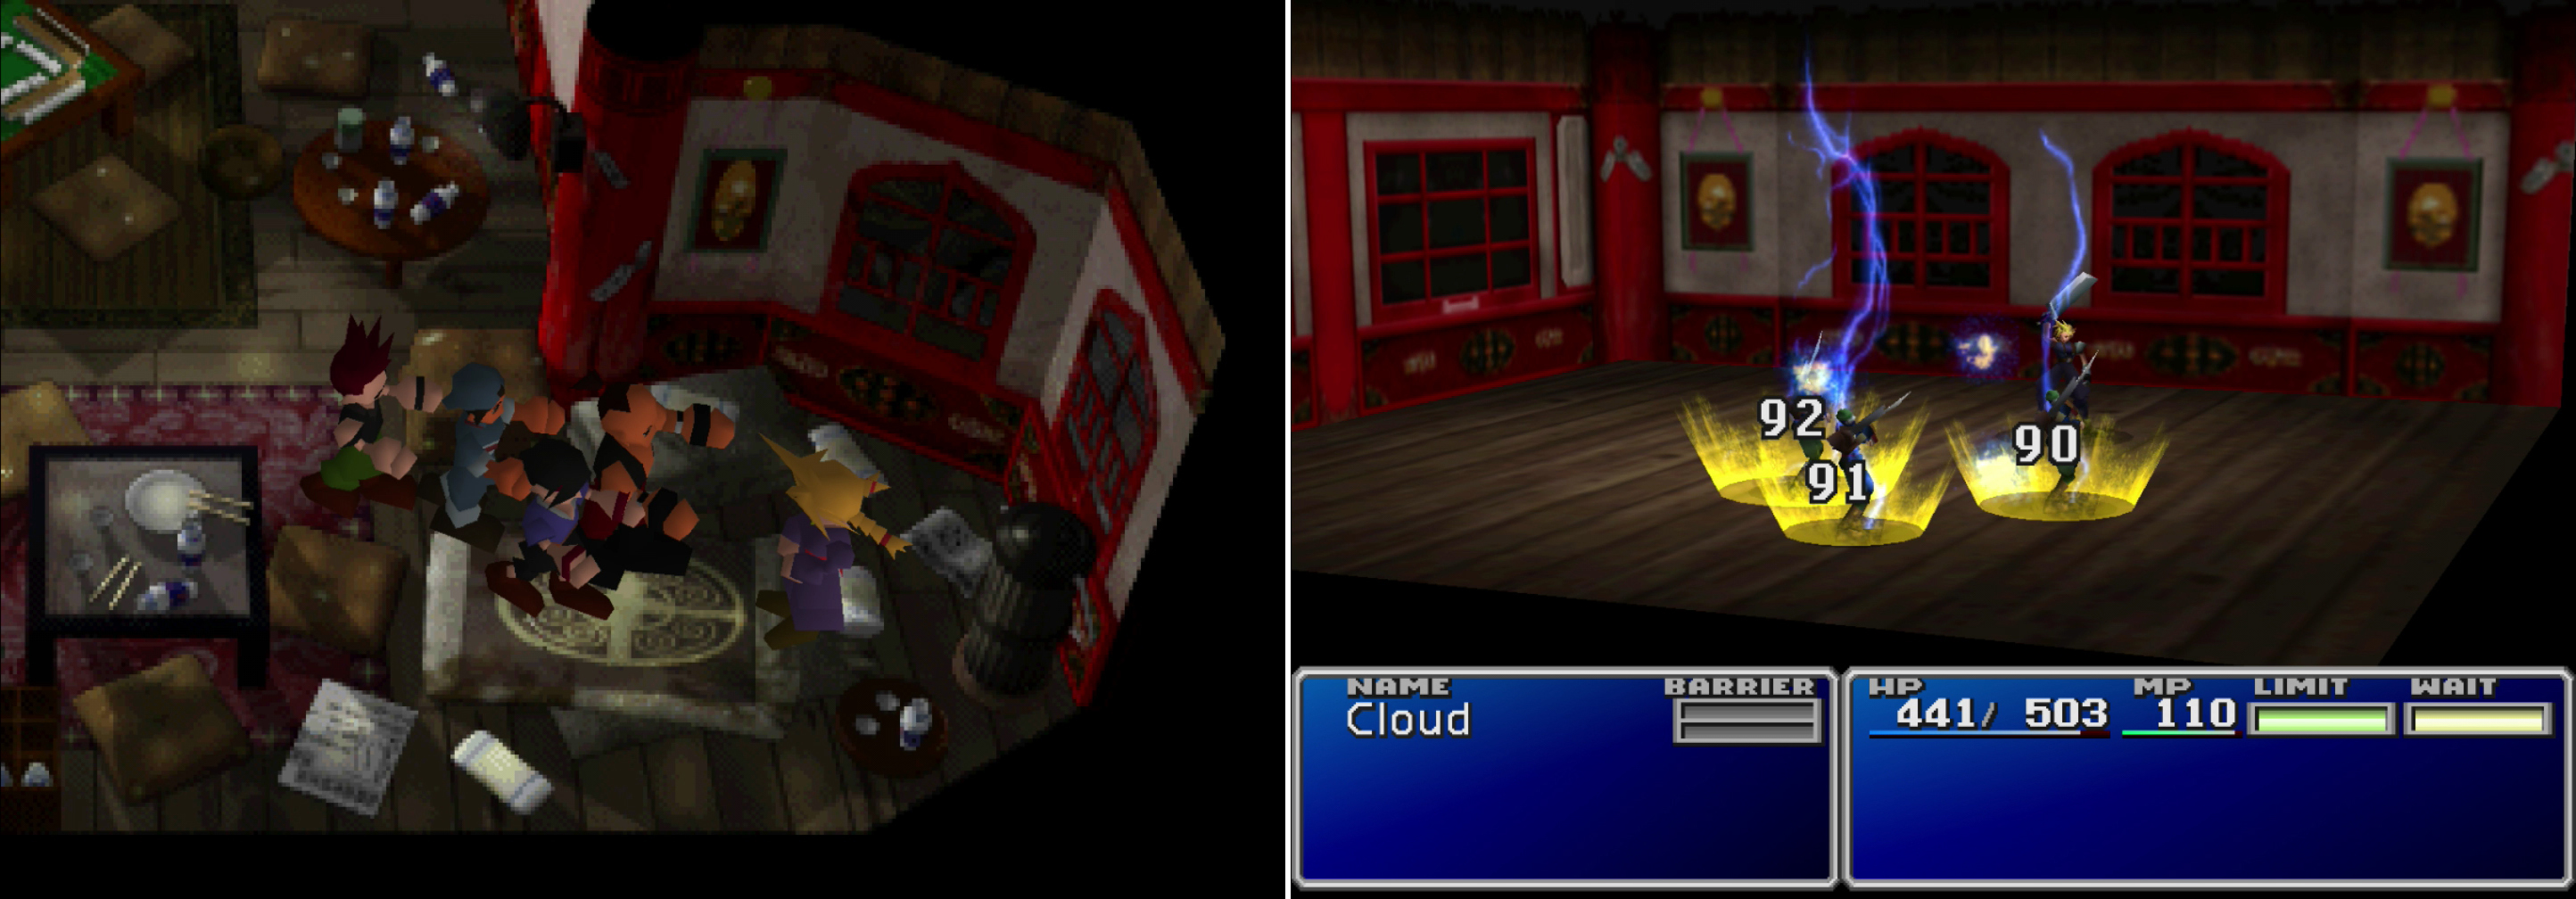 Corneo’s lackies will try to seduce Cloud-in-drag by using the infamous mummy pick-up technique (left). Unfortunately, Cloud will slip his disguise and fight off his suitors (right).